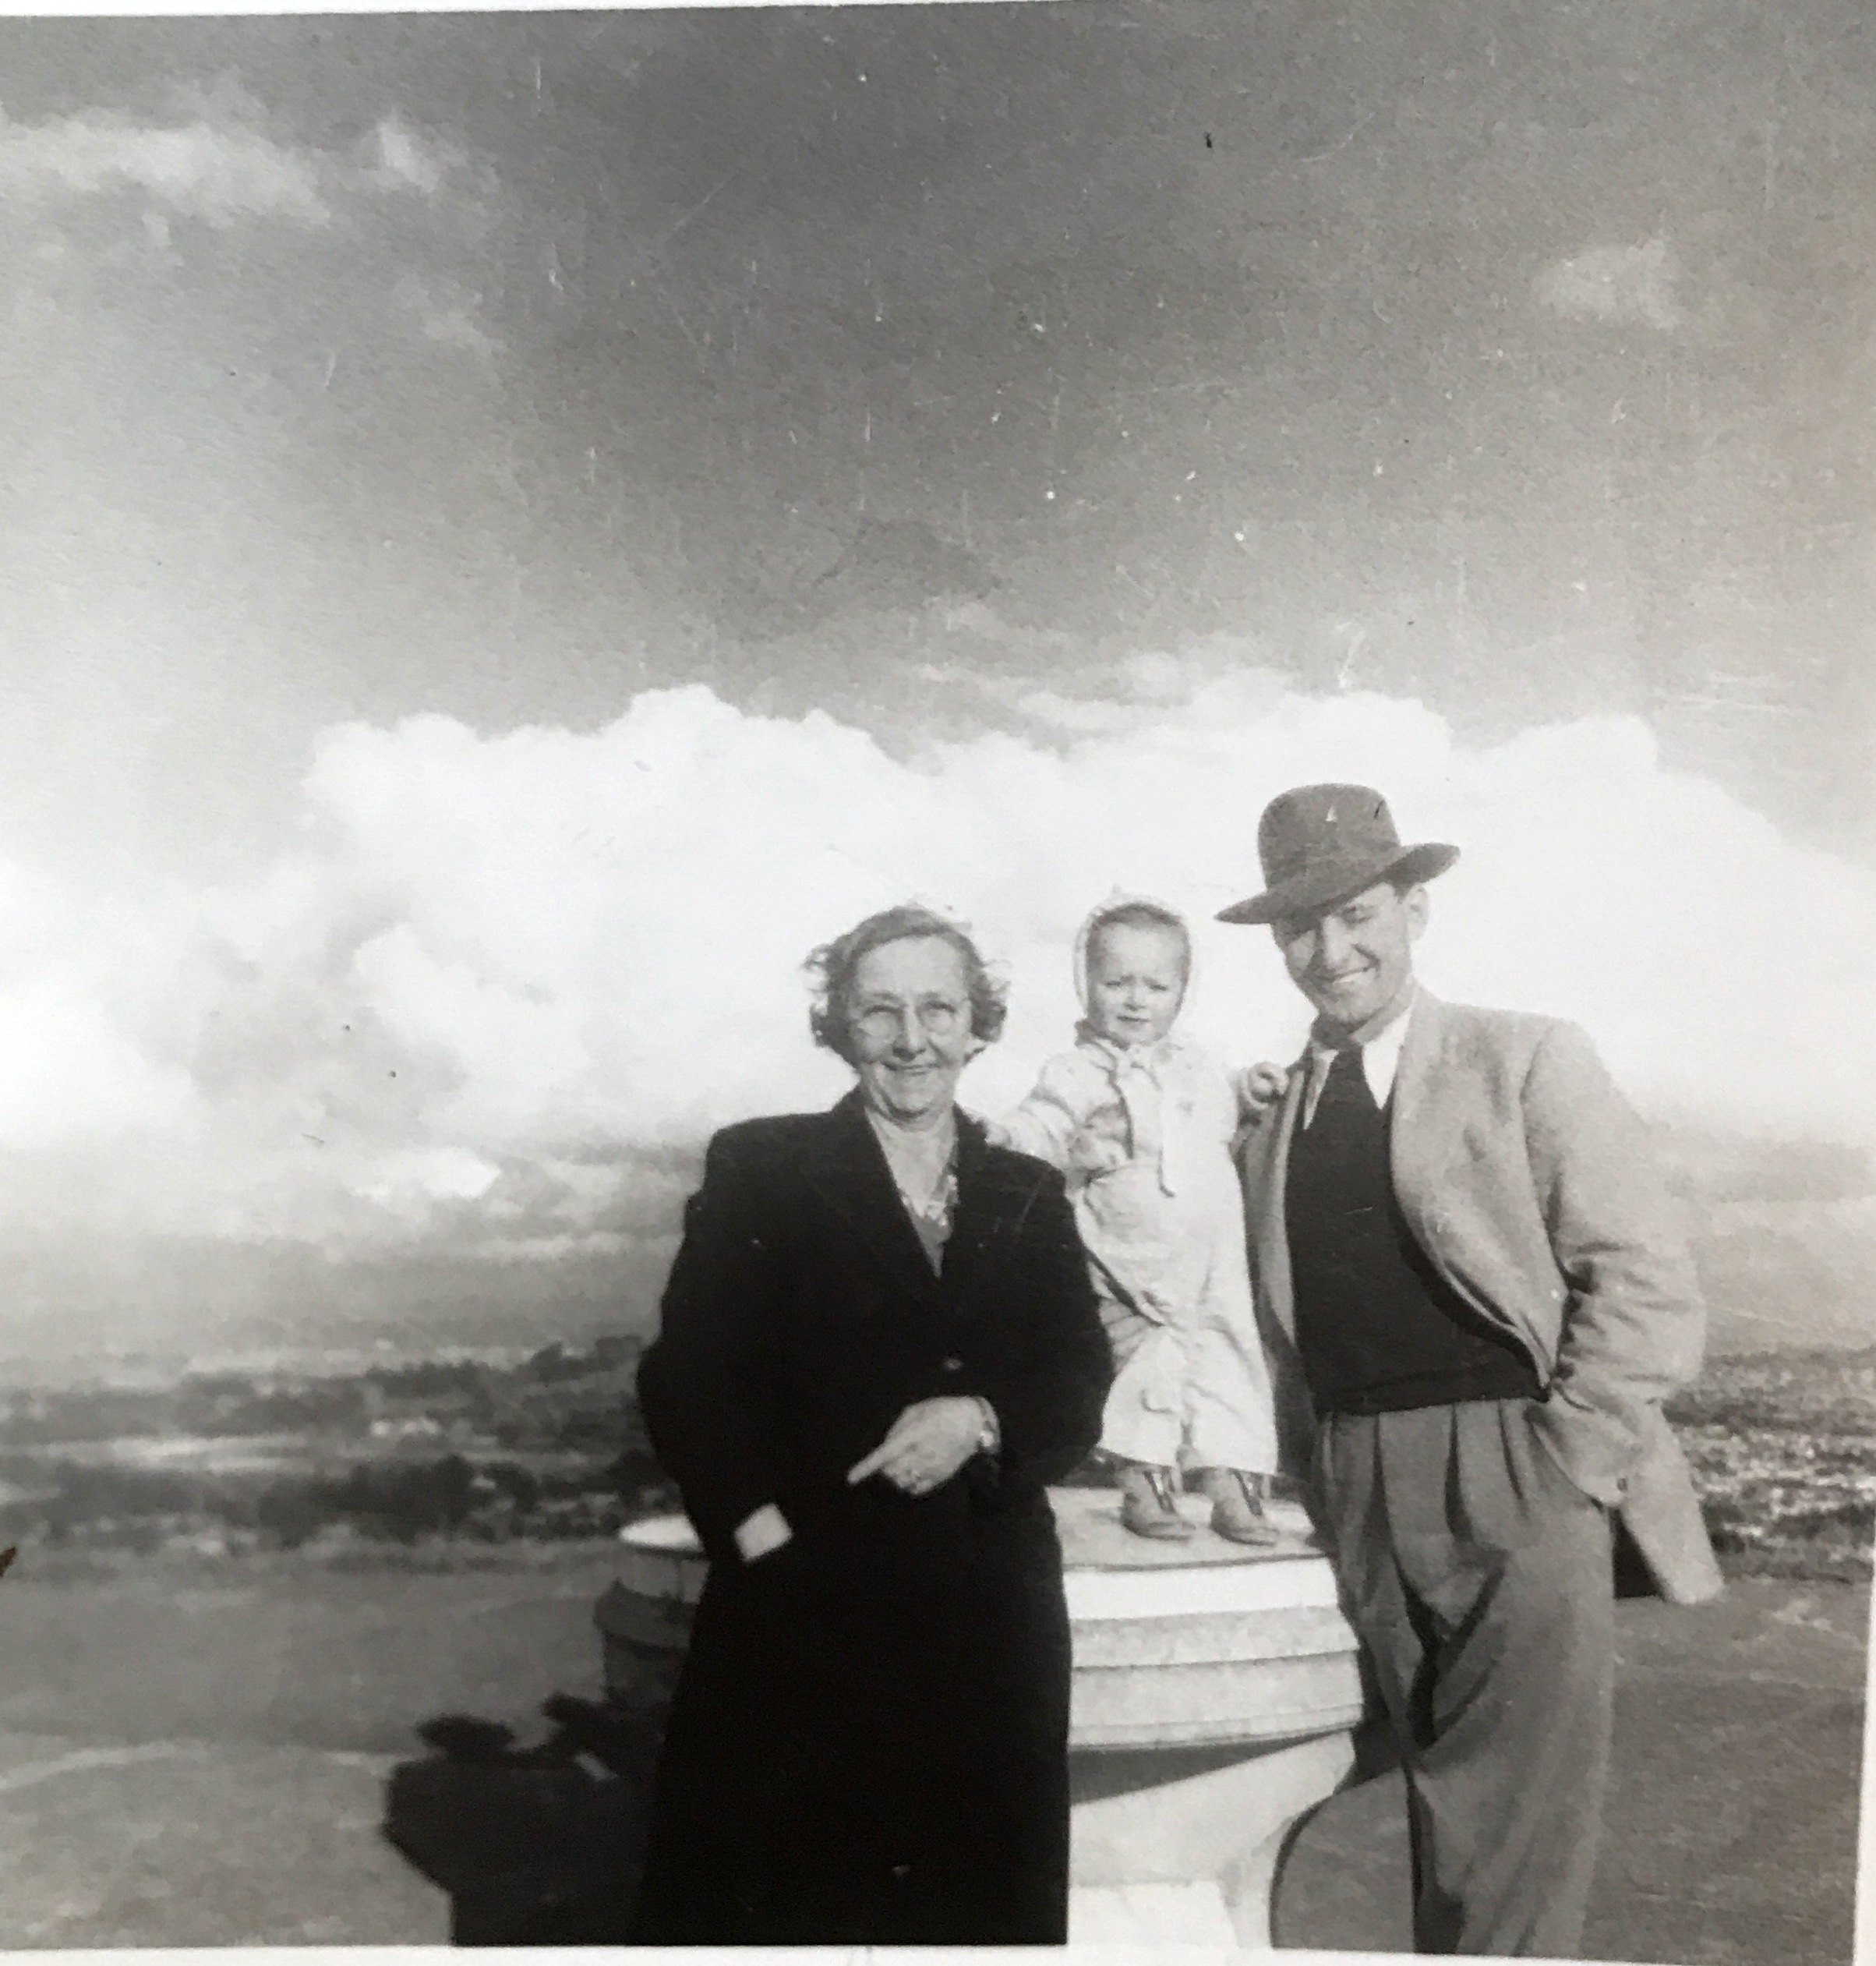 Taken in Auckland with my beloved Grandmother and Dad. 1952